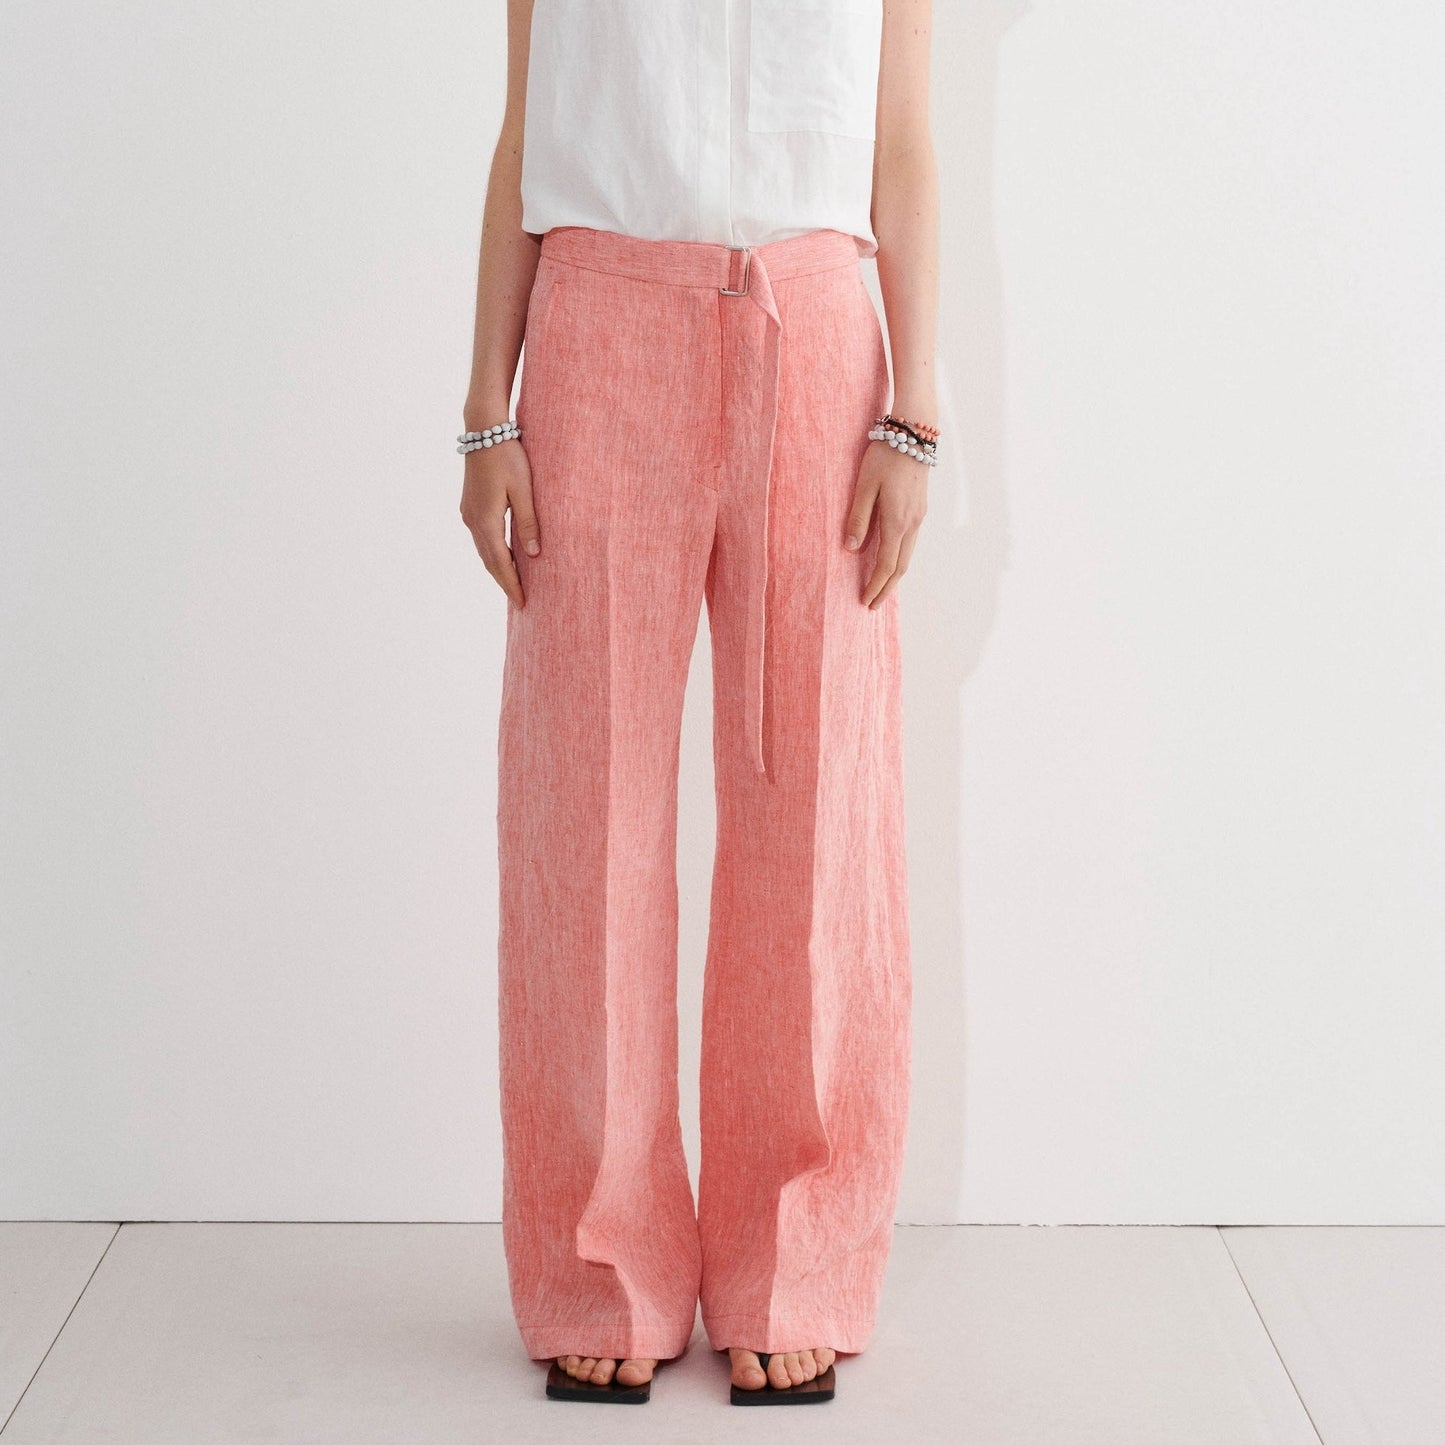 Phenyo Belted Pant in Coral Melange